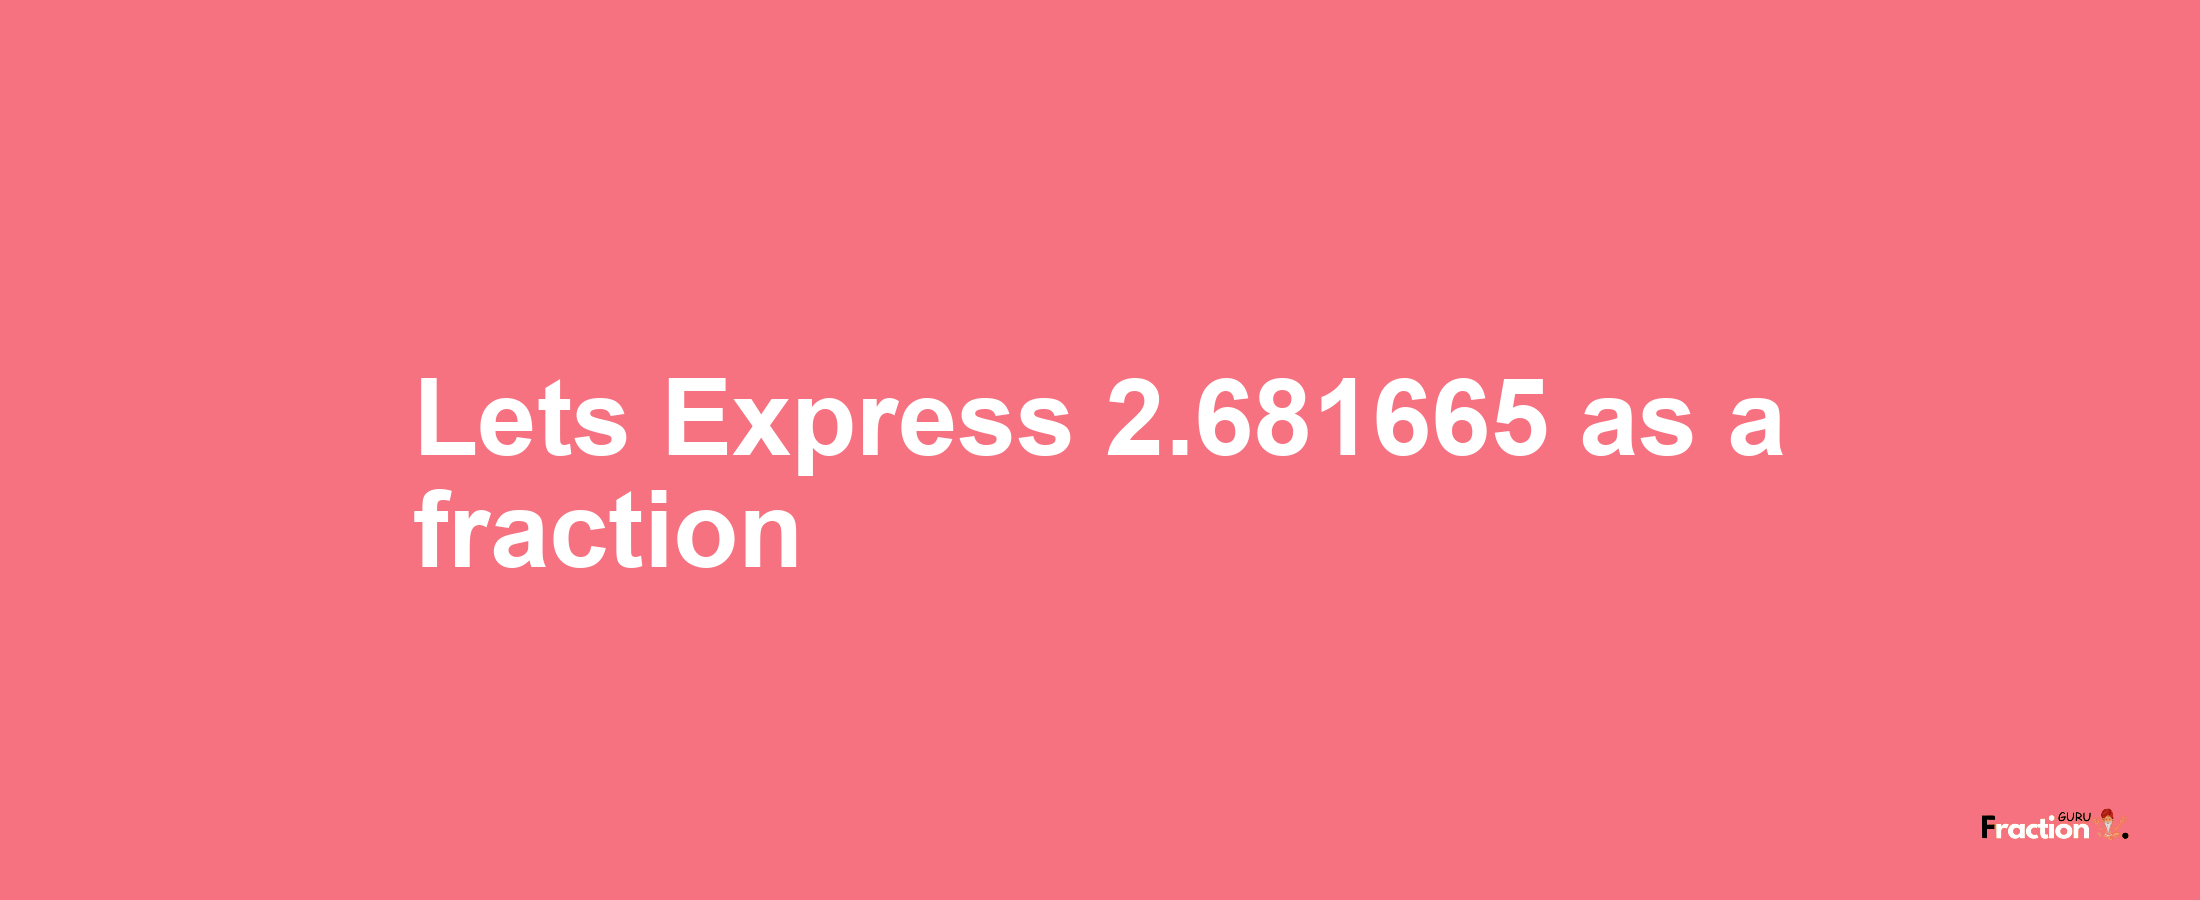 Lets Express 2.681665 as afraction